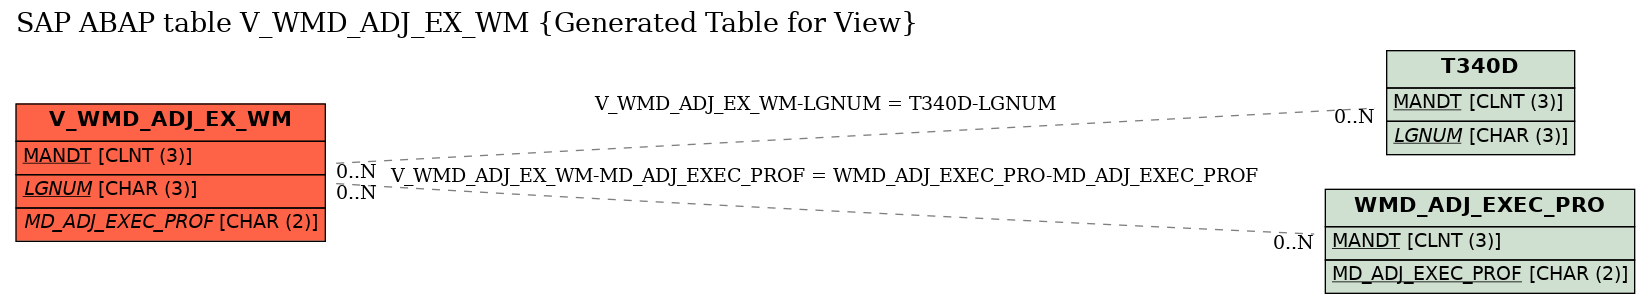 E-R Diagram for table V_WMD_ADJ_EX_WM (Generated Table for View)